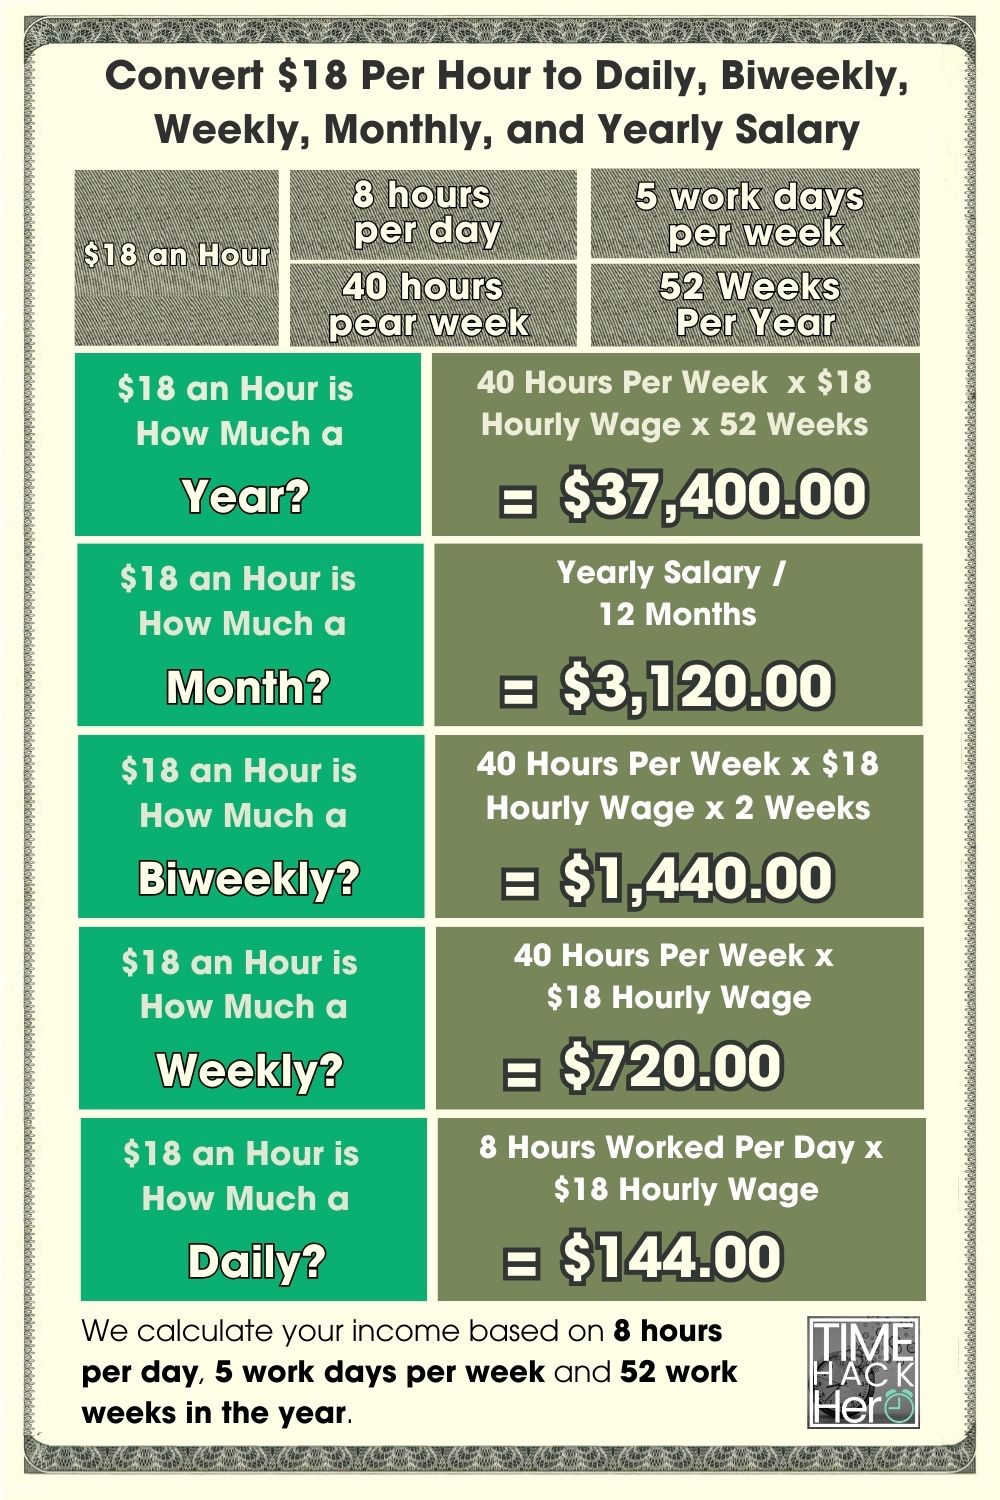 Convert $18 Per Hour to Daily, Biweekly, Weekly, Monthly, and Yearly Salary